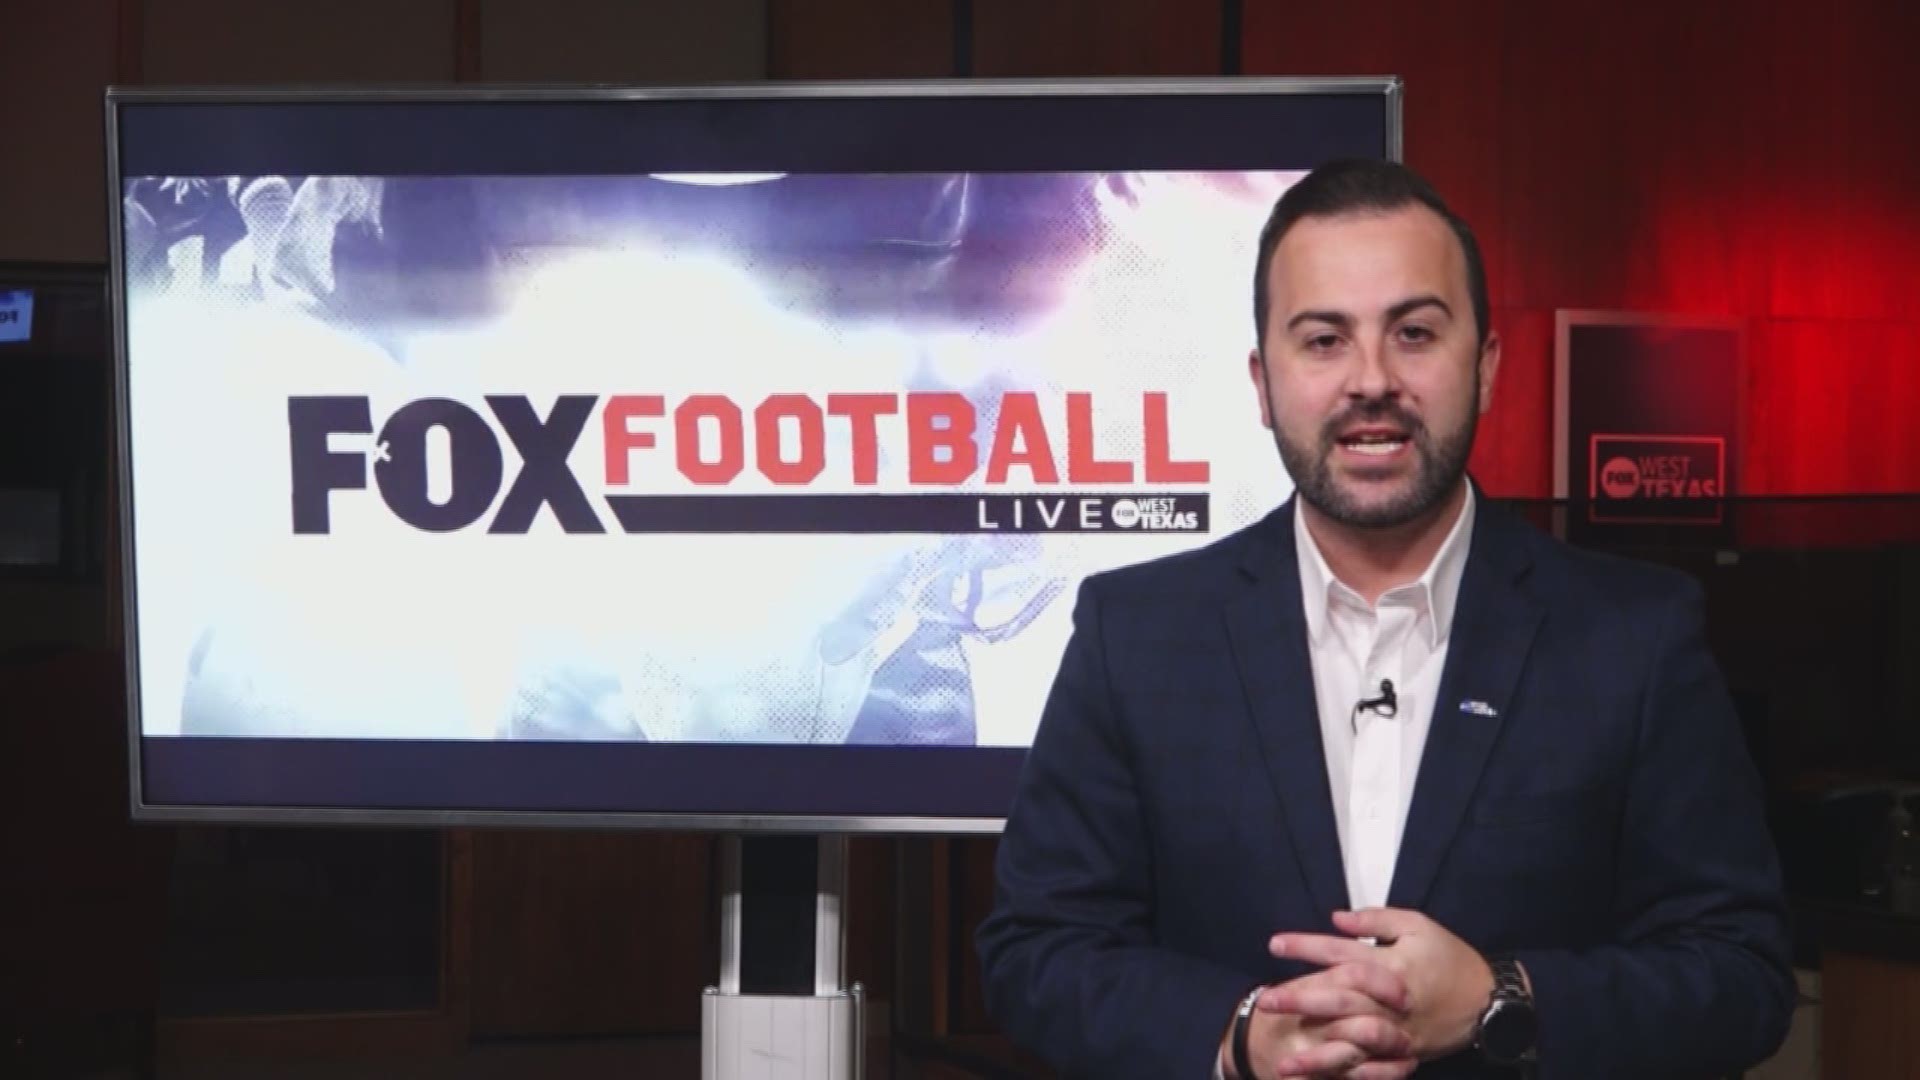 FOX Football Live FULL episode from 11/8/19.